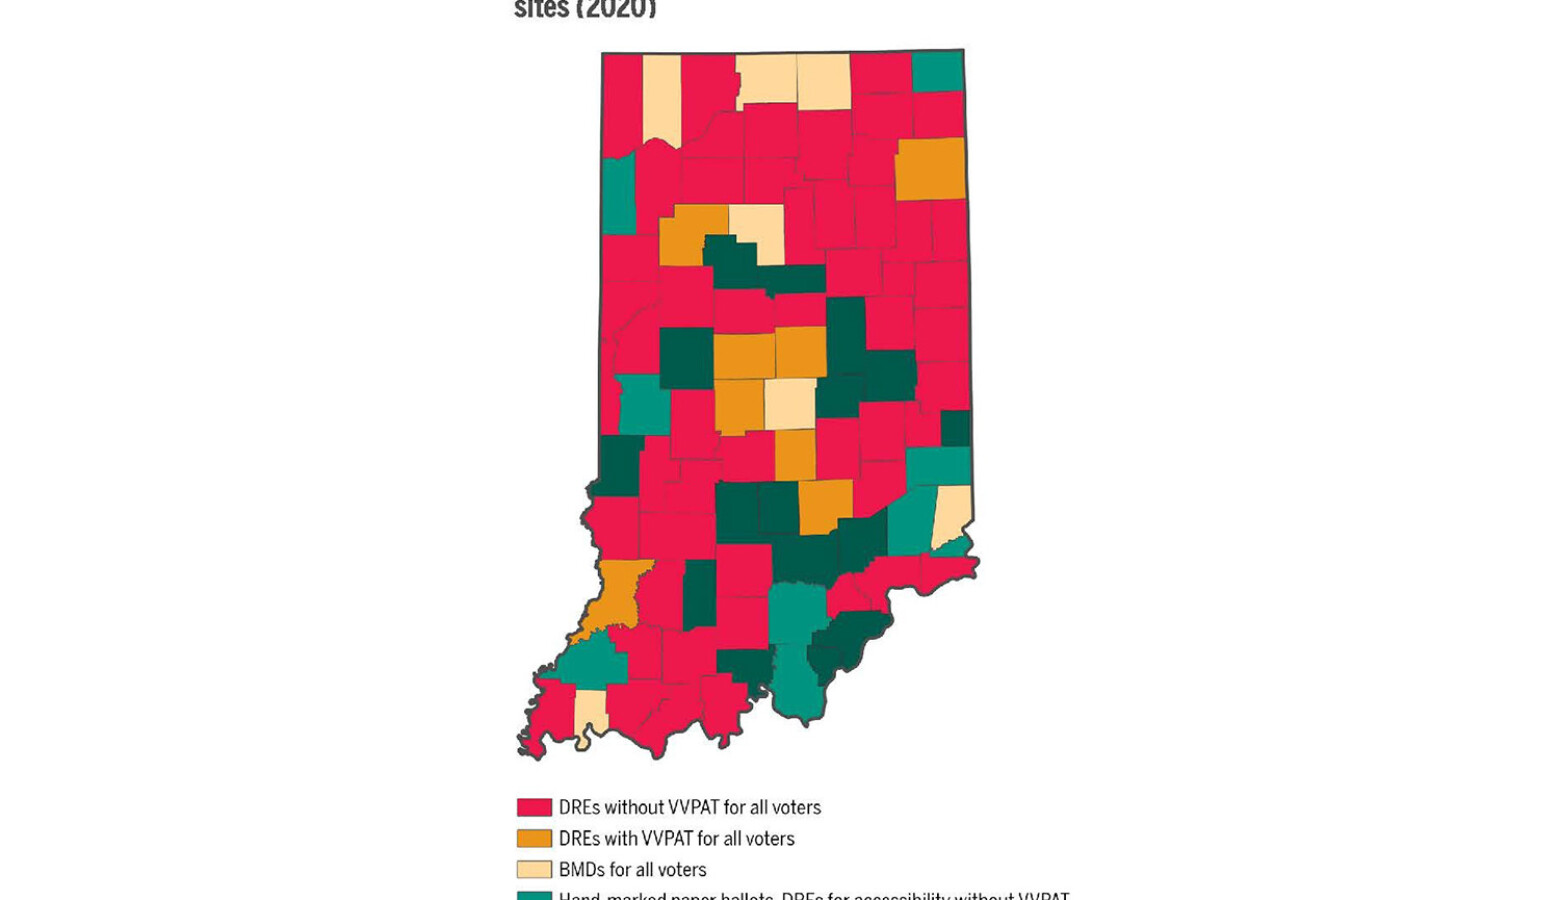 A majority of Indiana counties - 52 out of 92 - use voting machines without a verified paper tail, putting them at greater risk for irreversible error. (Courtest of the IU Public Policy Institute)